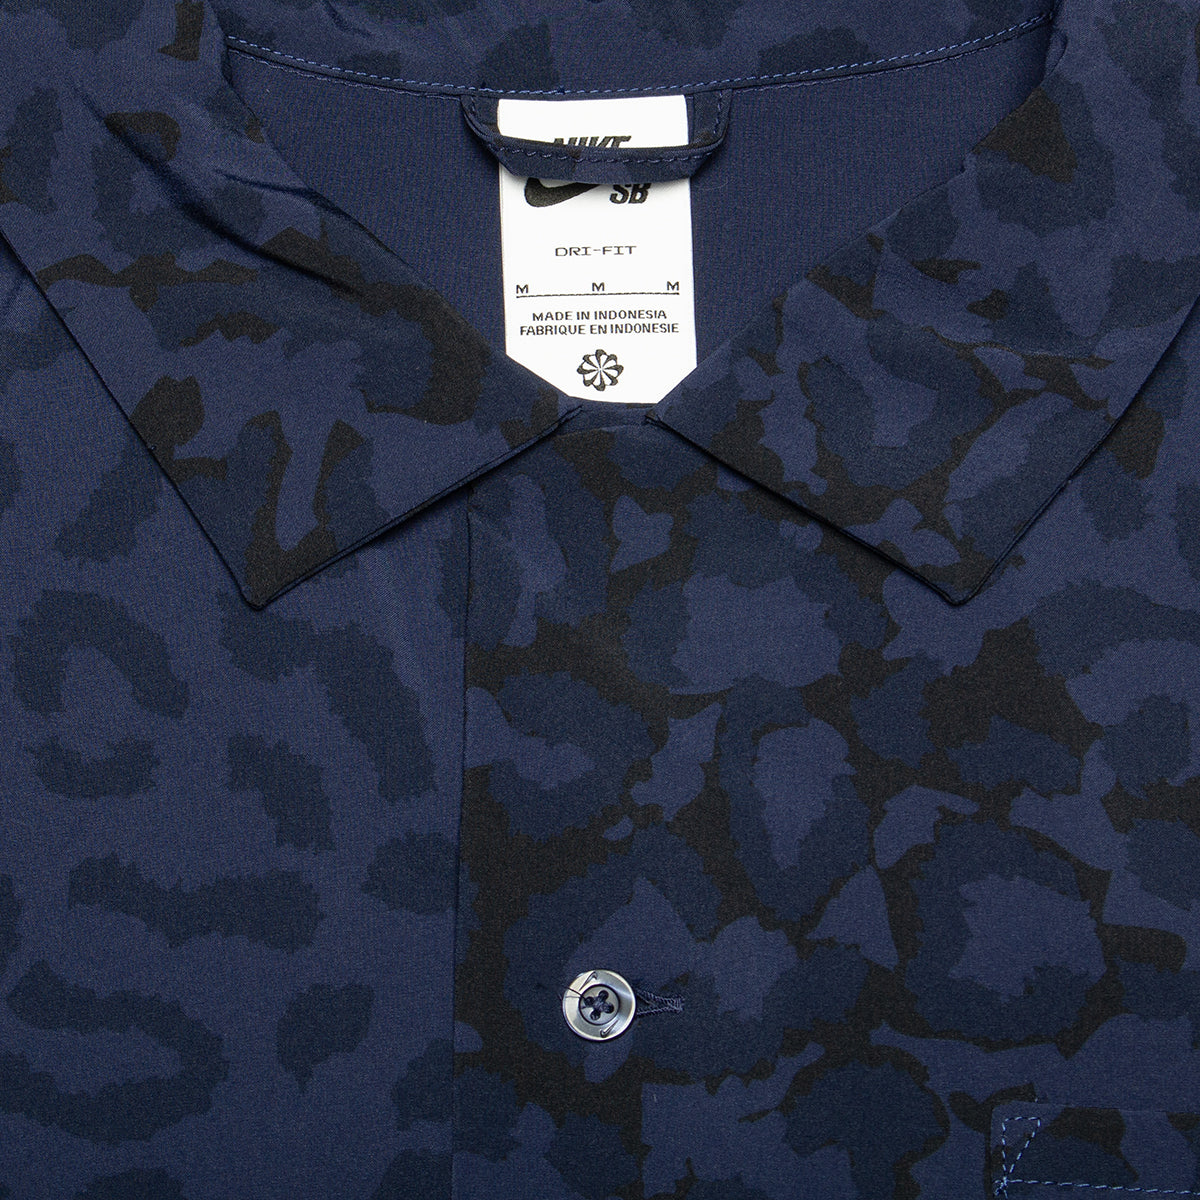 Nike SB | S/S Bowler Button-Up Shirt Style # FN2595-410 Color : Midnight Navy